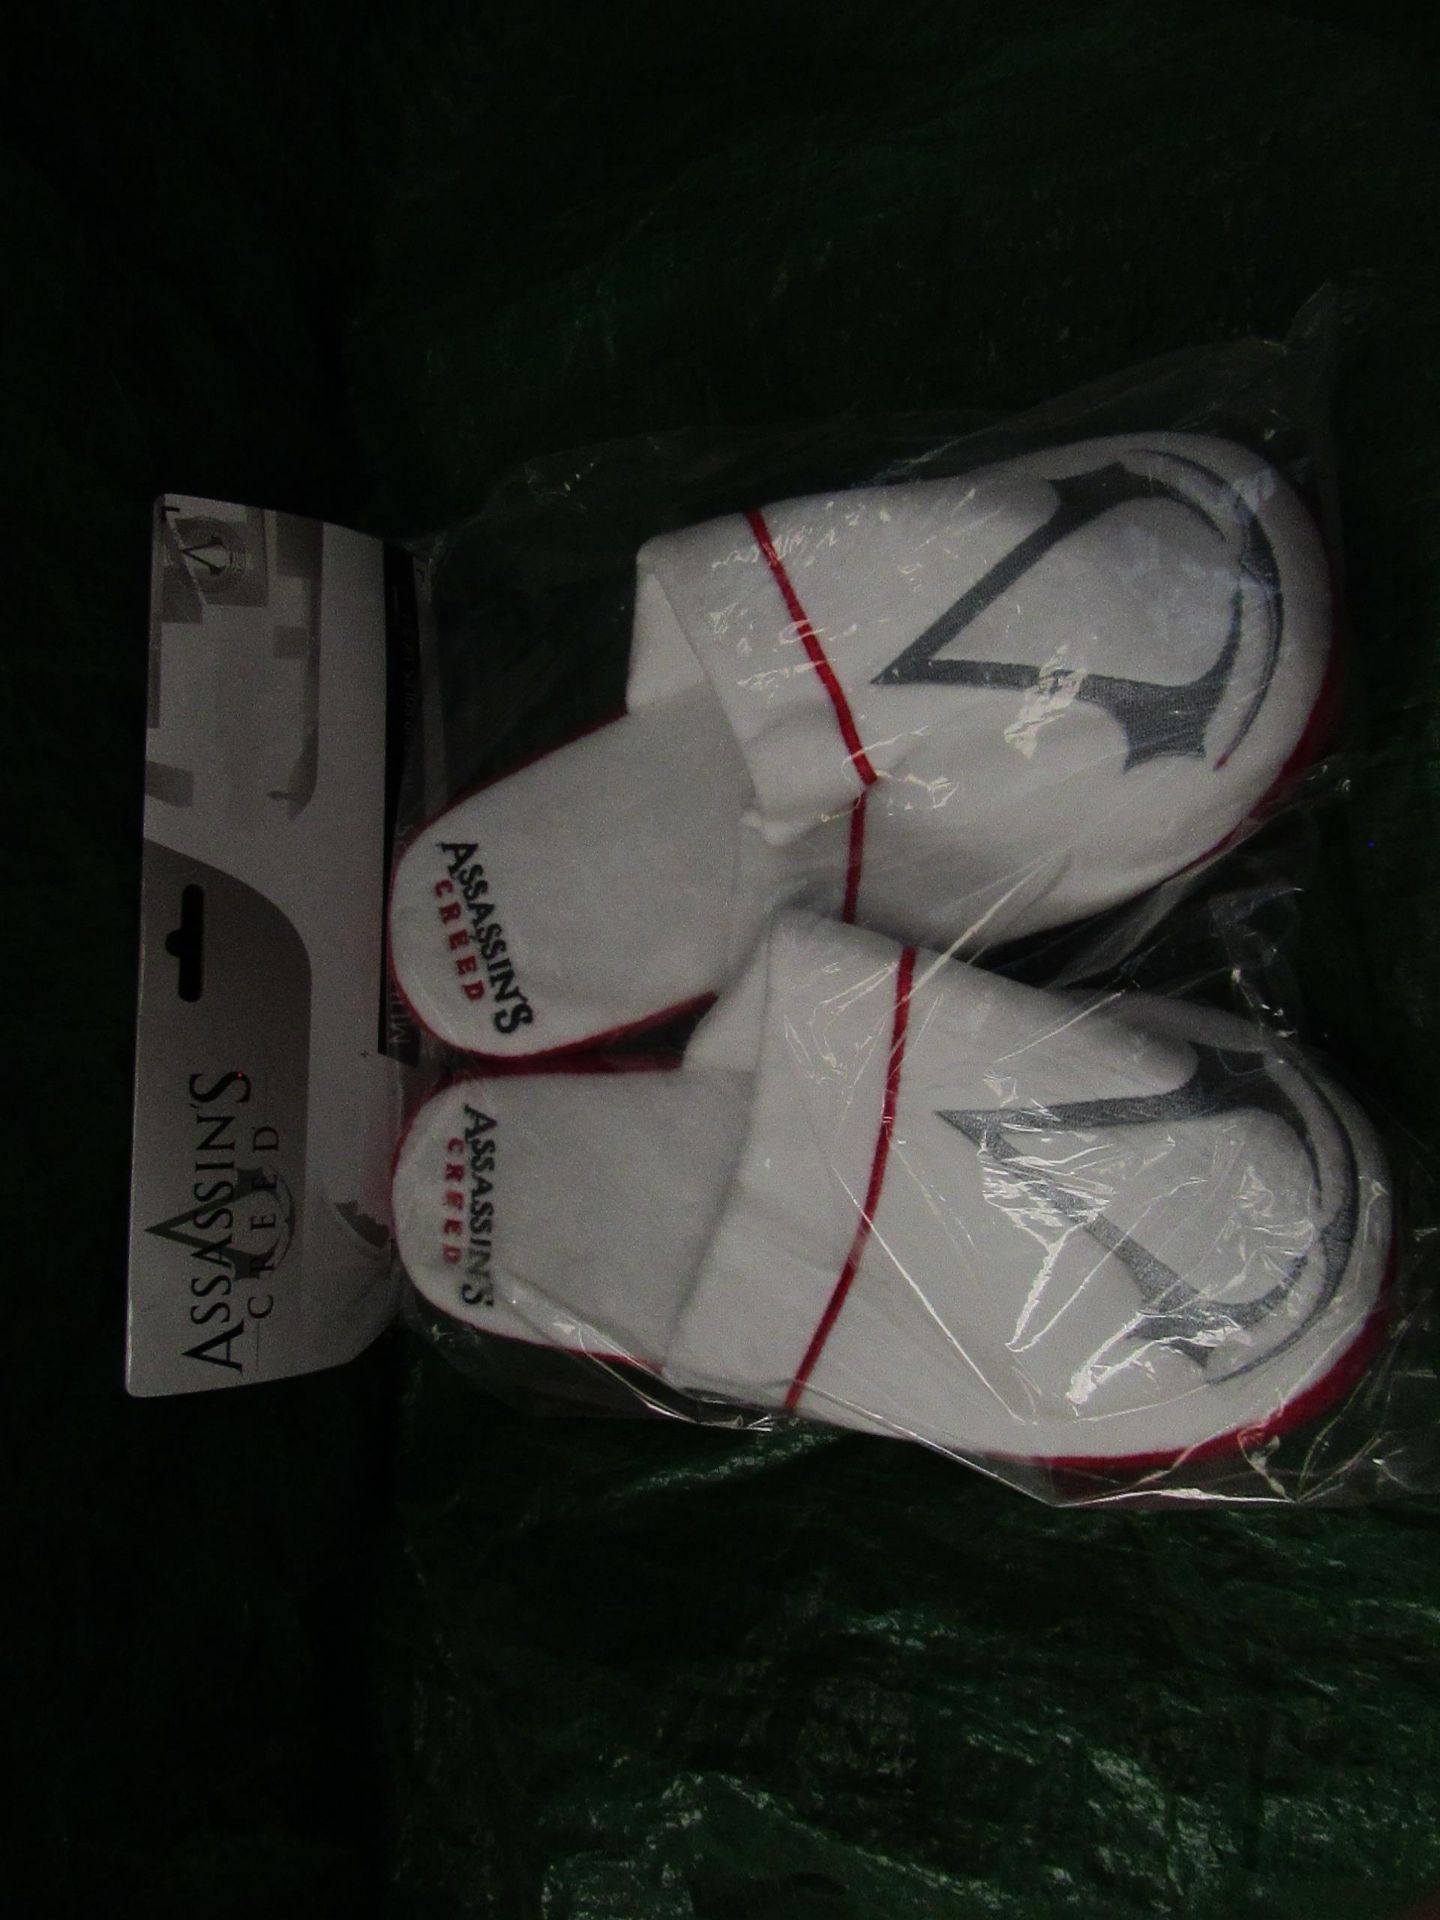 2x Assassins Creed - Anti-Slip Mule Slippers - Size 5-7 - New & Packaged.